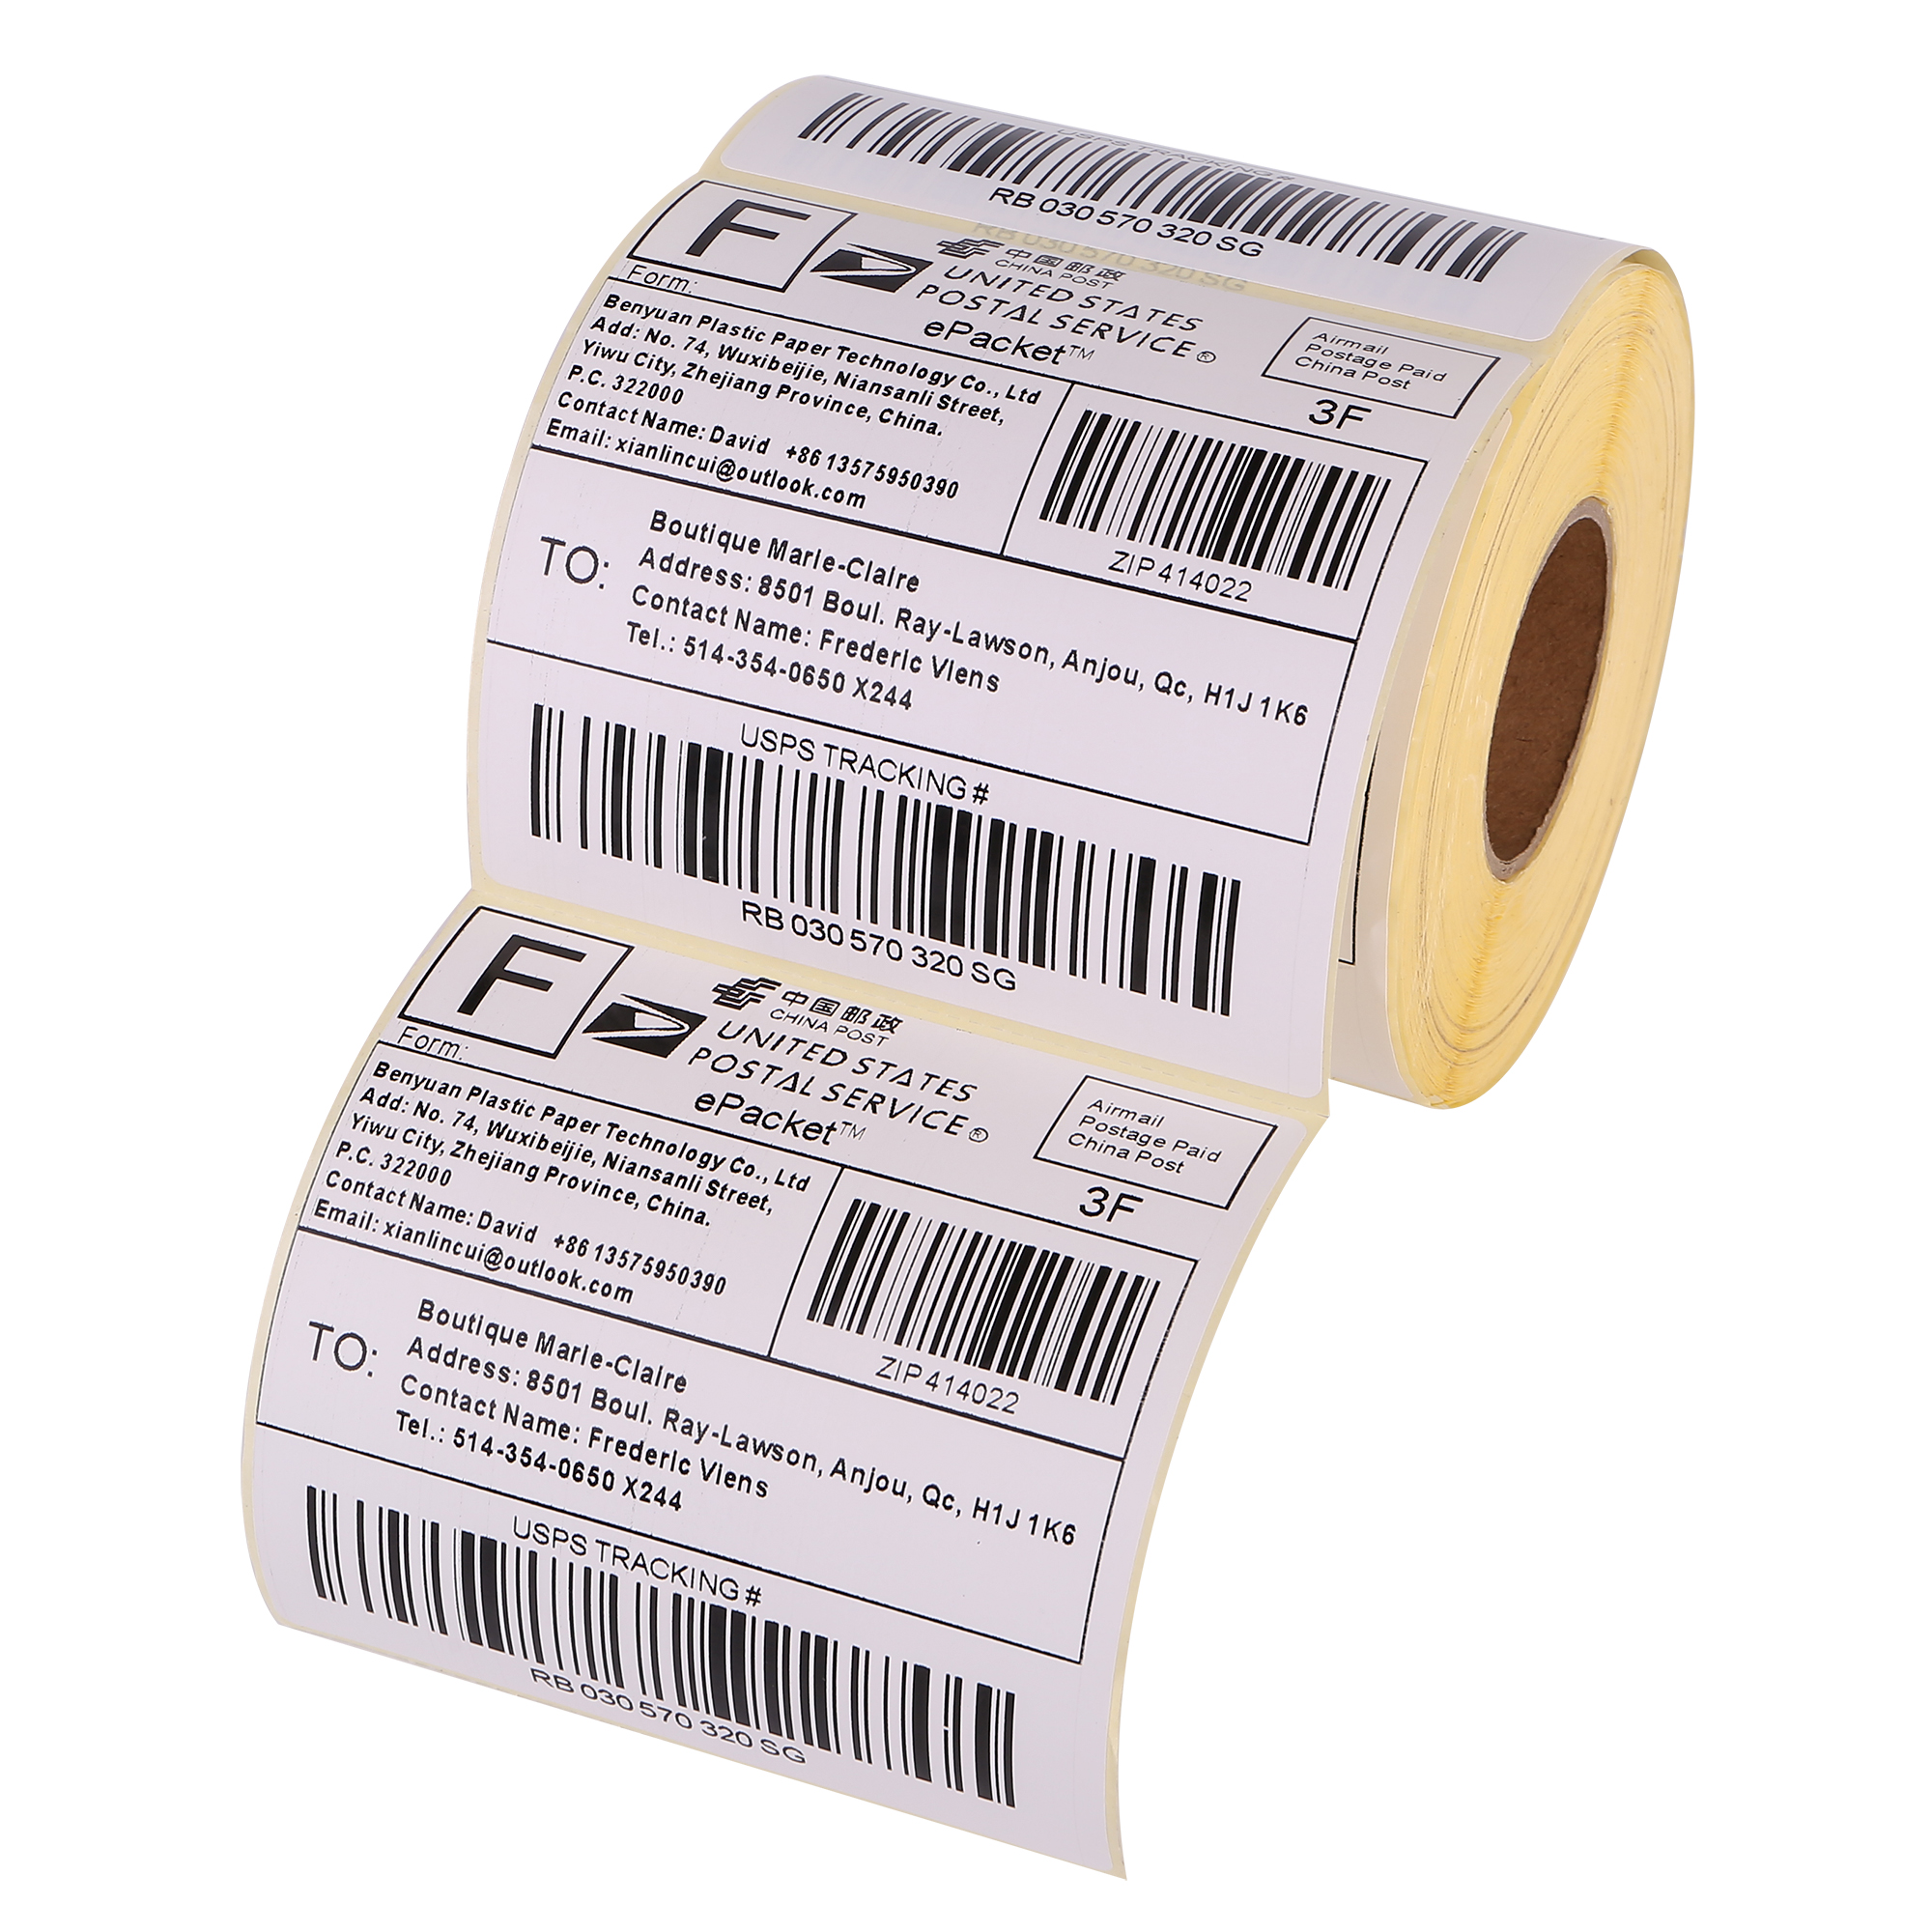 Hot sell 4"x6" A6 Thermal Sticker Adhesive Blank Shipping Label